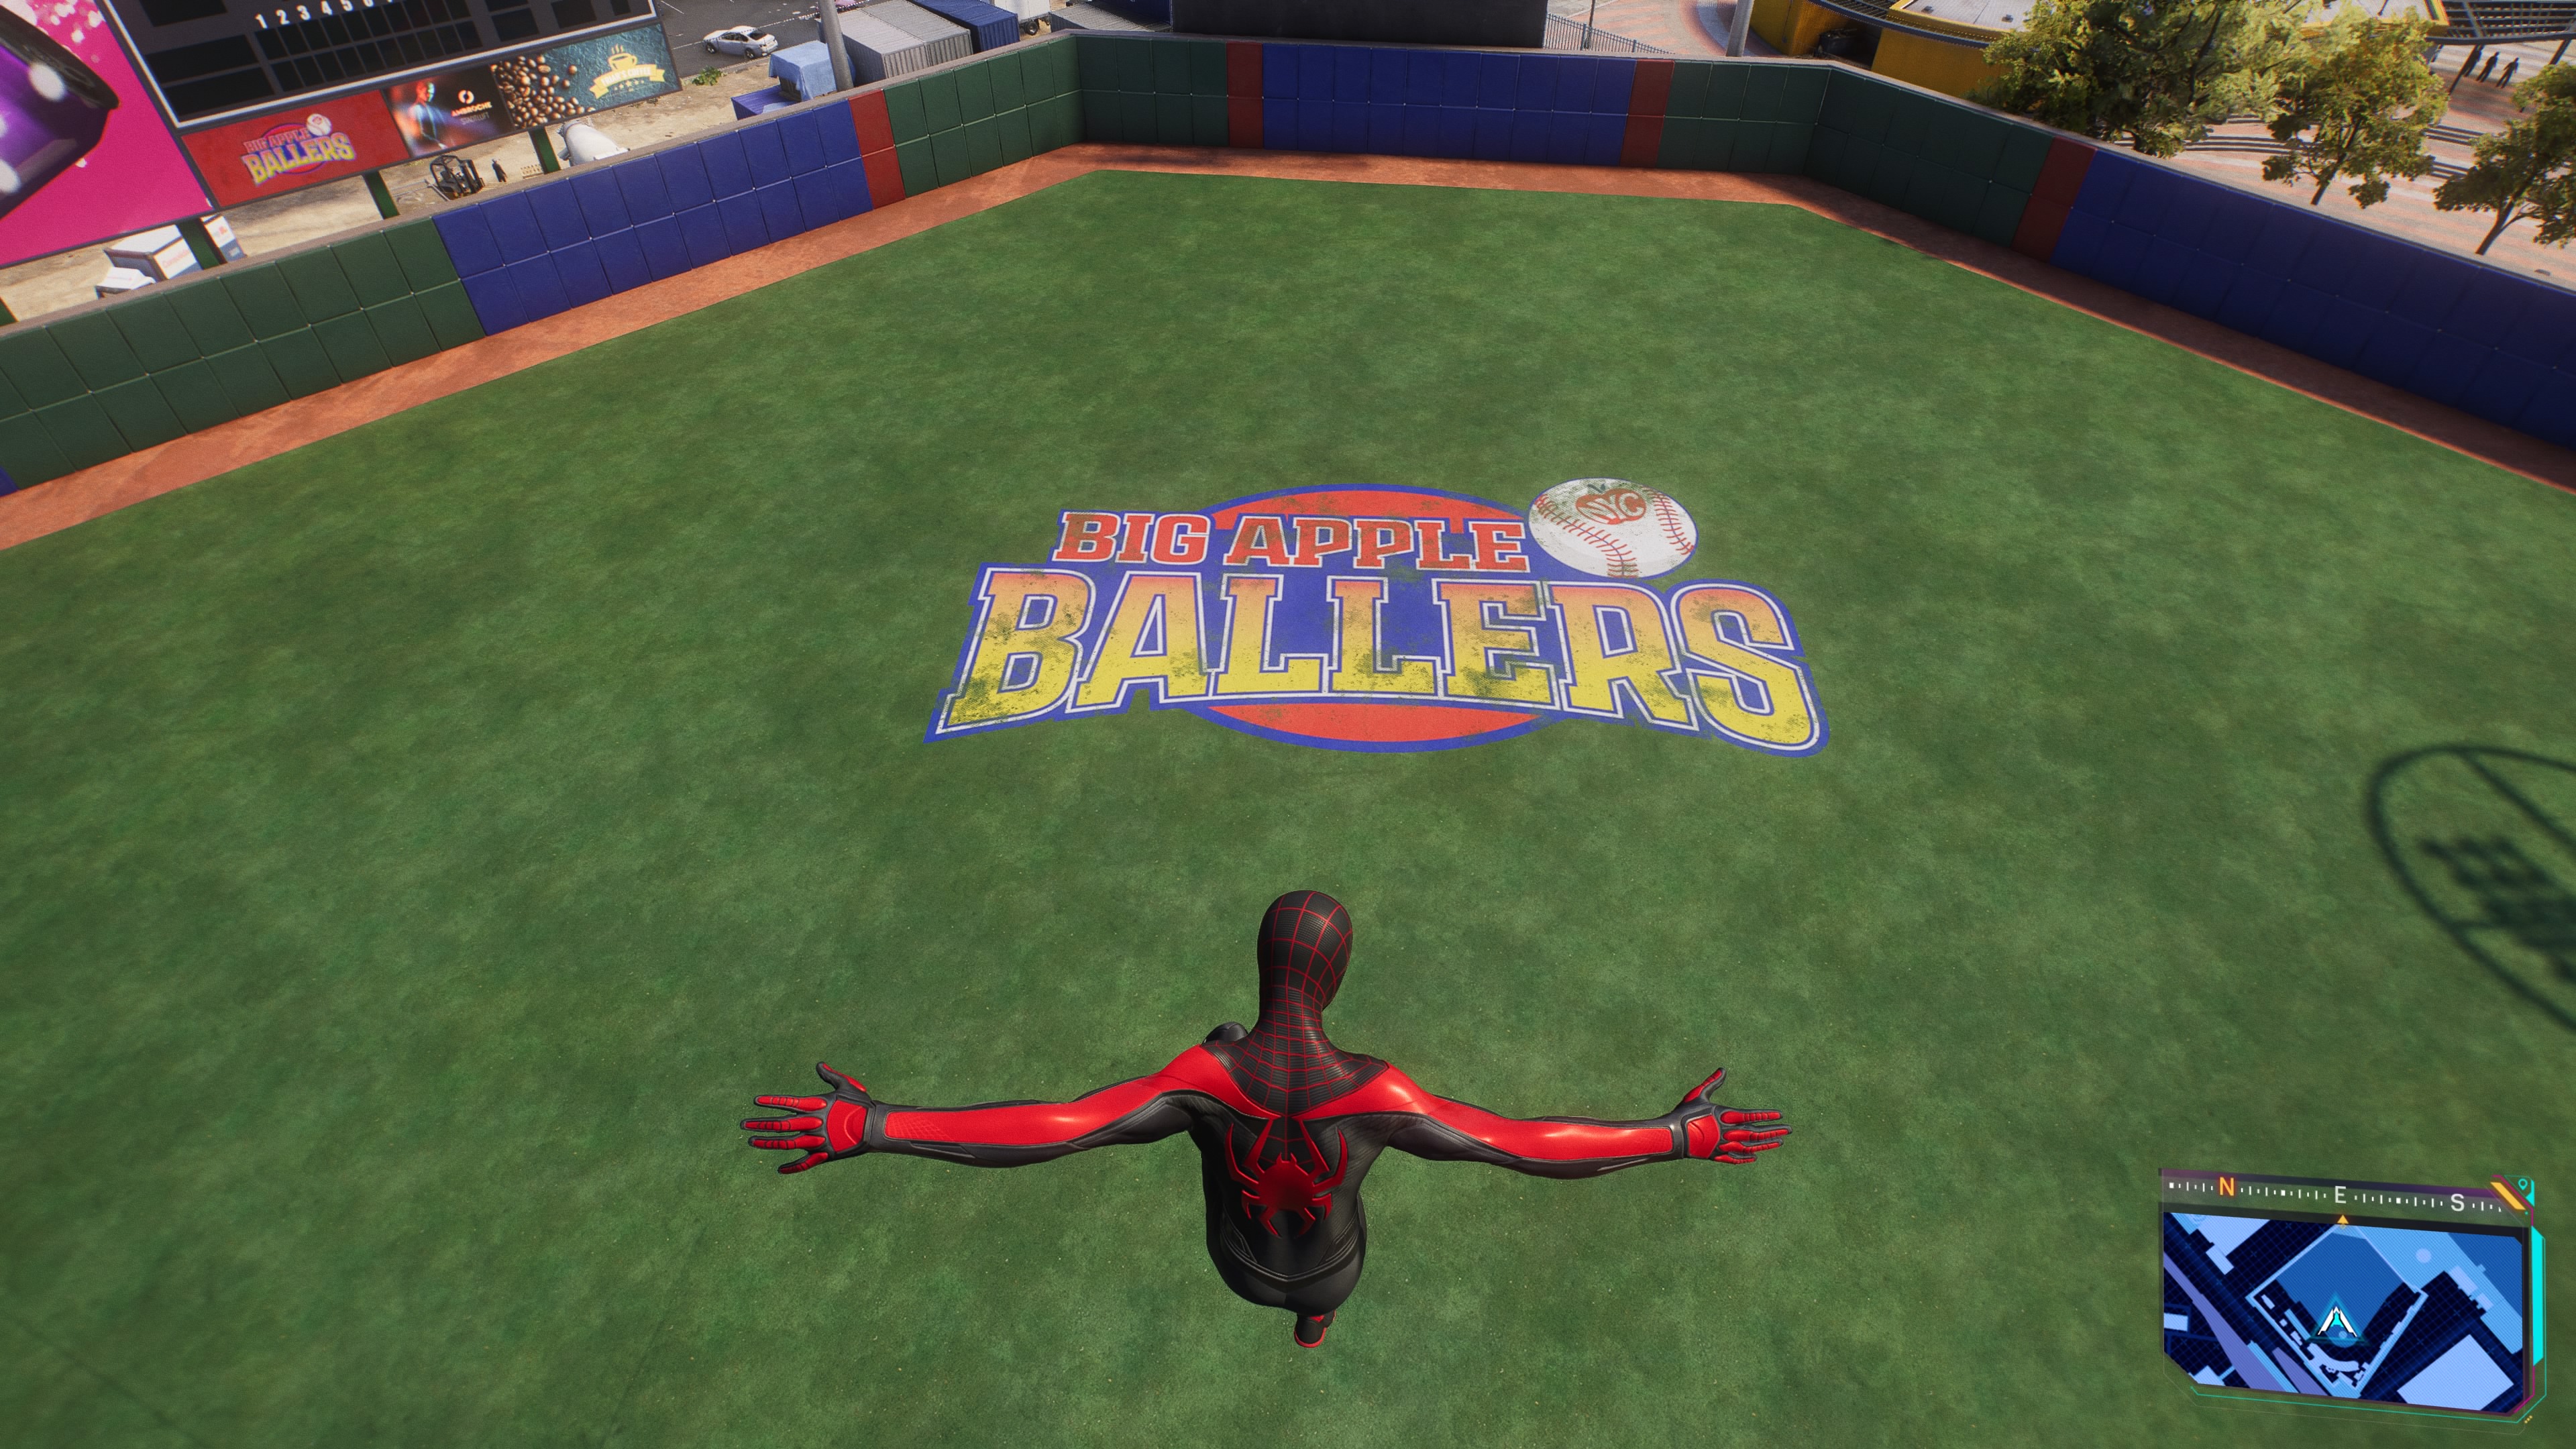 Miles leaps into the Big Apple Ballers baseball stadium in Marvel’s Spider-Man 2